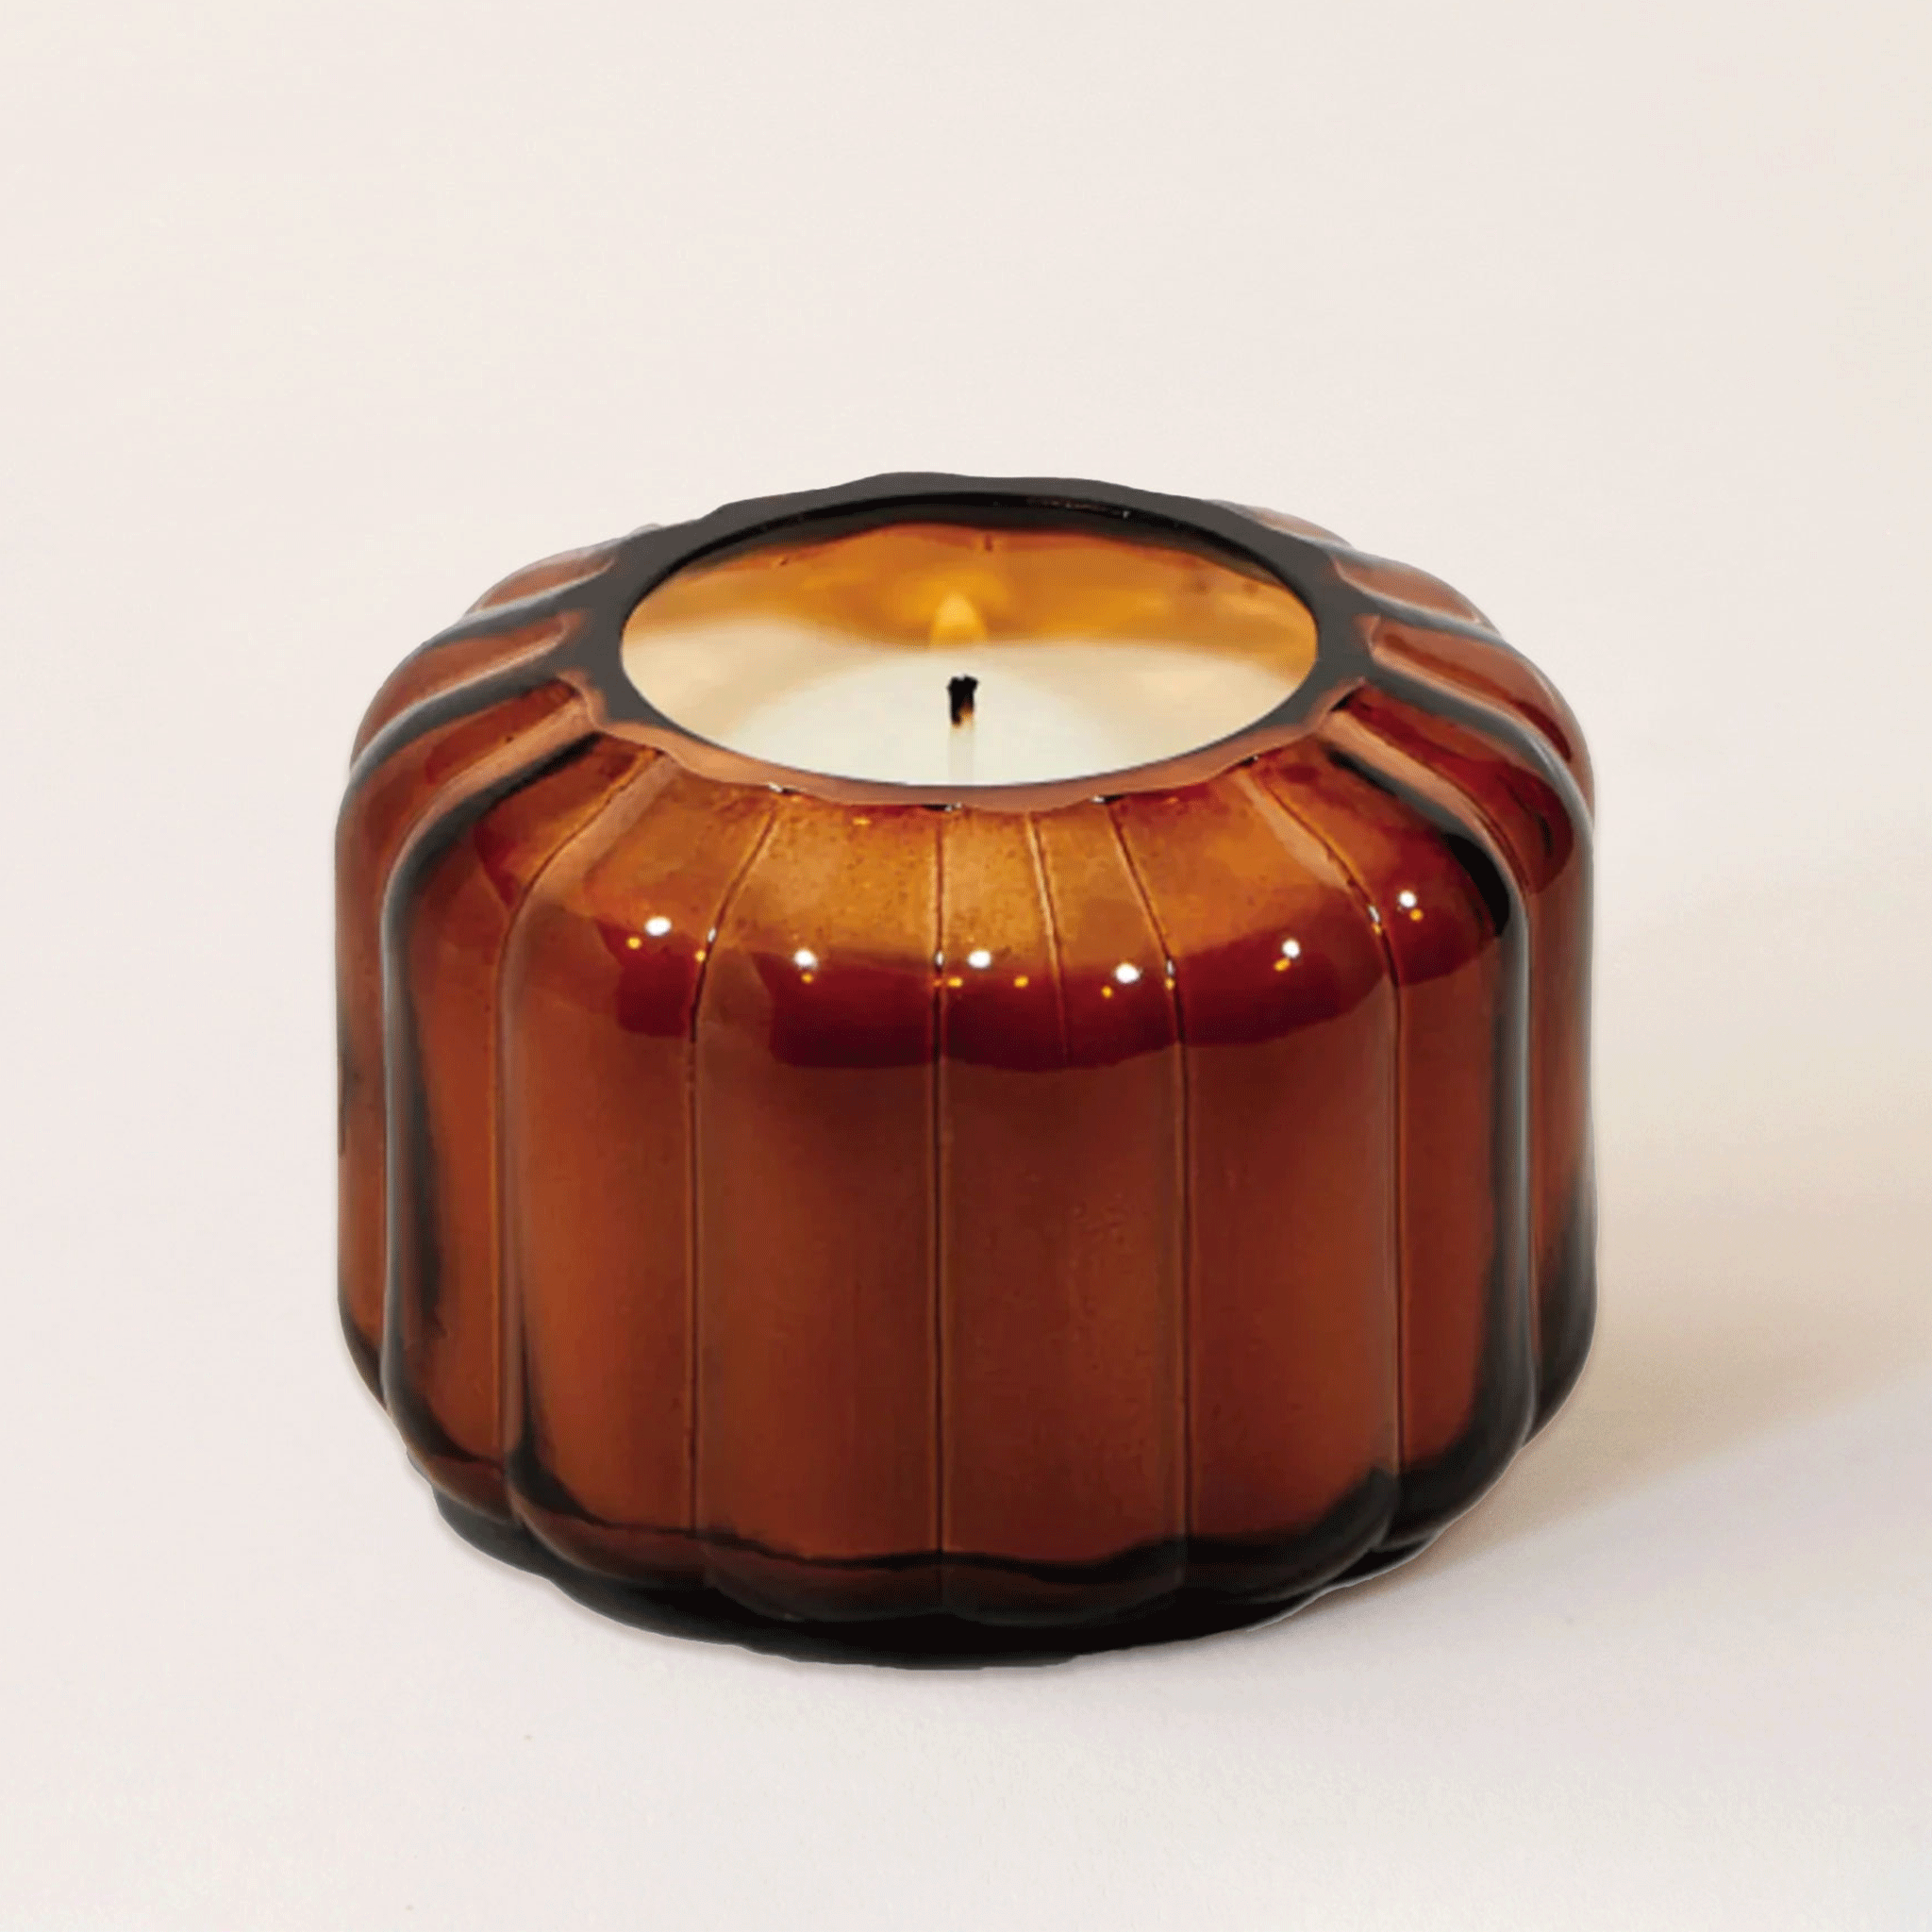 An amber glass candle with a ribbed texture and a single wick.